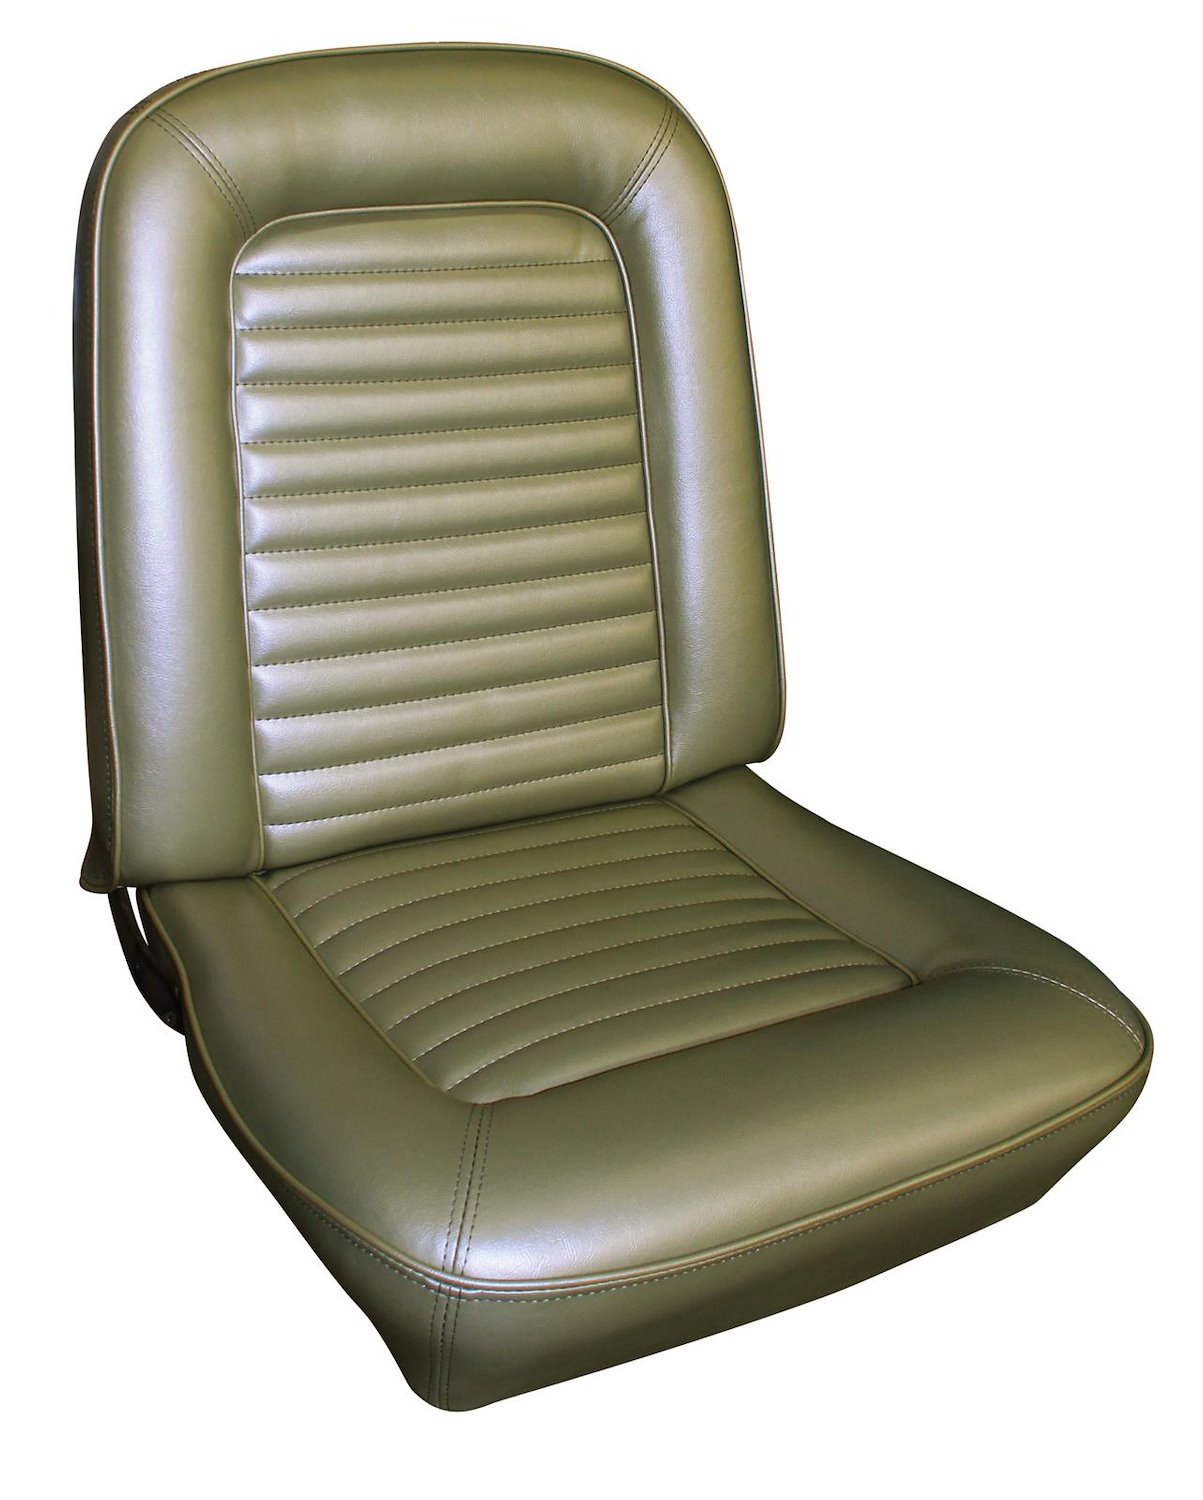 1971-1973 Ford Mustang Sports-Roof Standard Interior Front Bucket and Rear Bench Upholstery Set